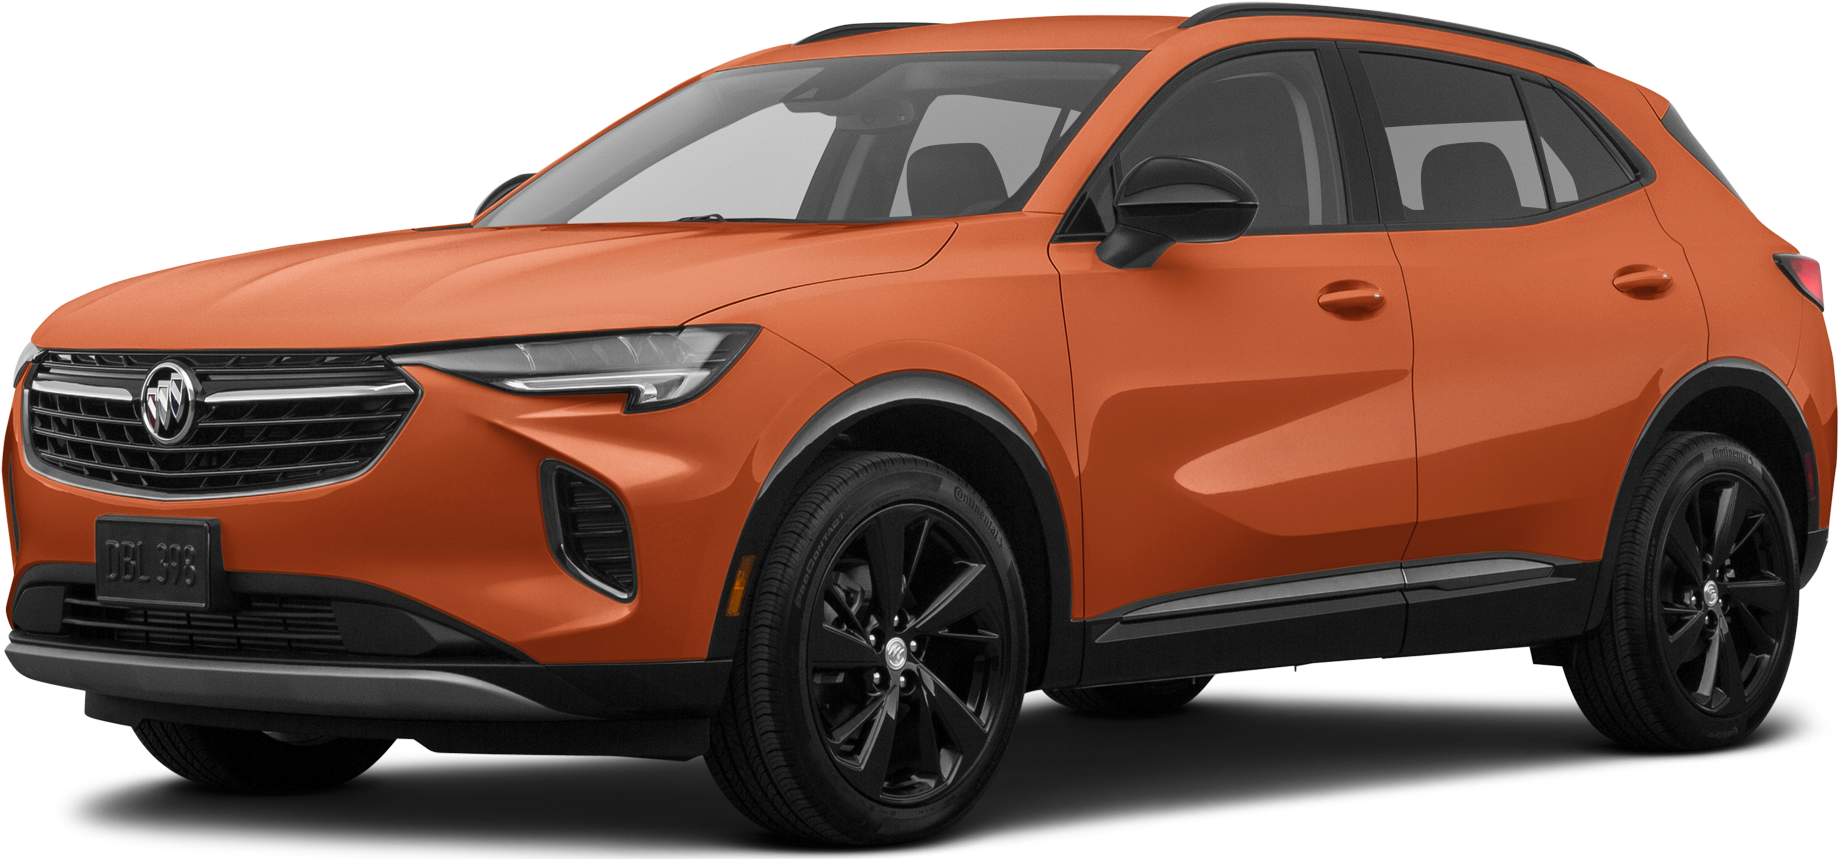 This Week in Car Buying: Top November deals; Ride the Jeep wave;  Millennials embrace car loans; Buick taps China for crossover; Audi Q7  priced - Kelley Blue Book